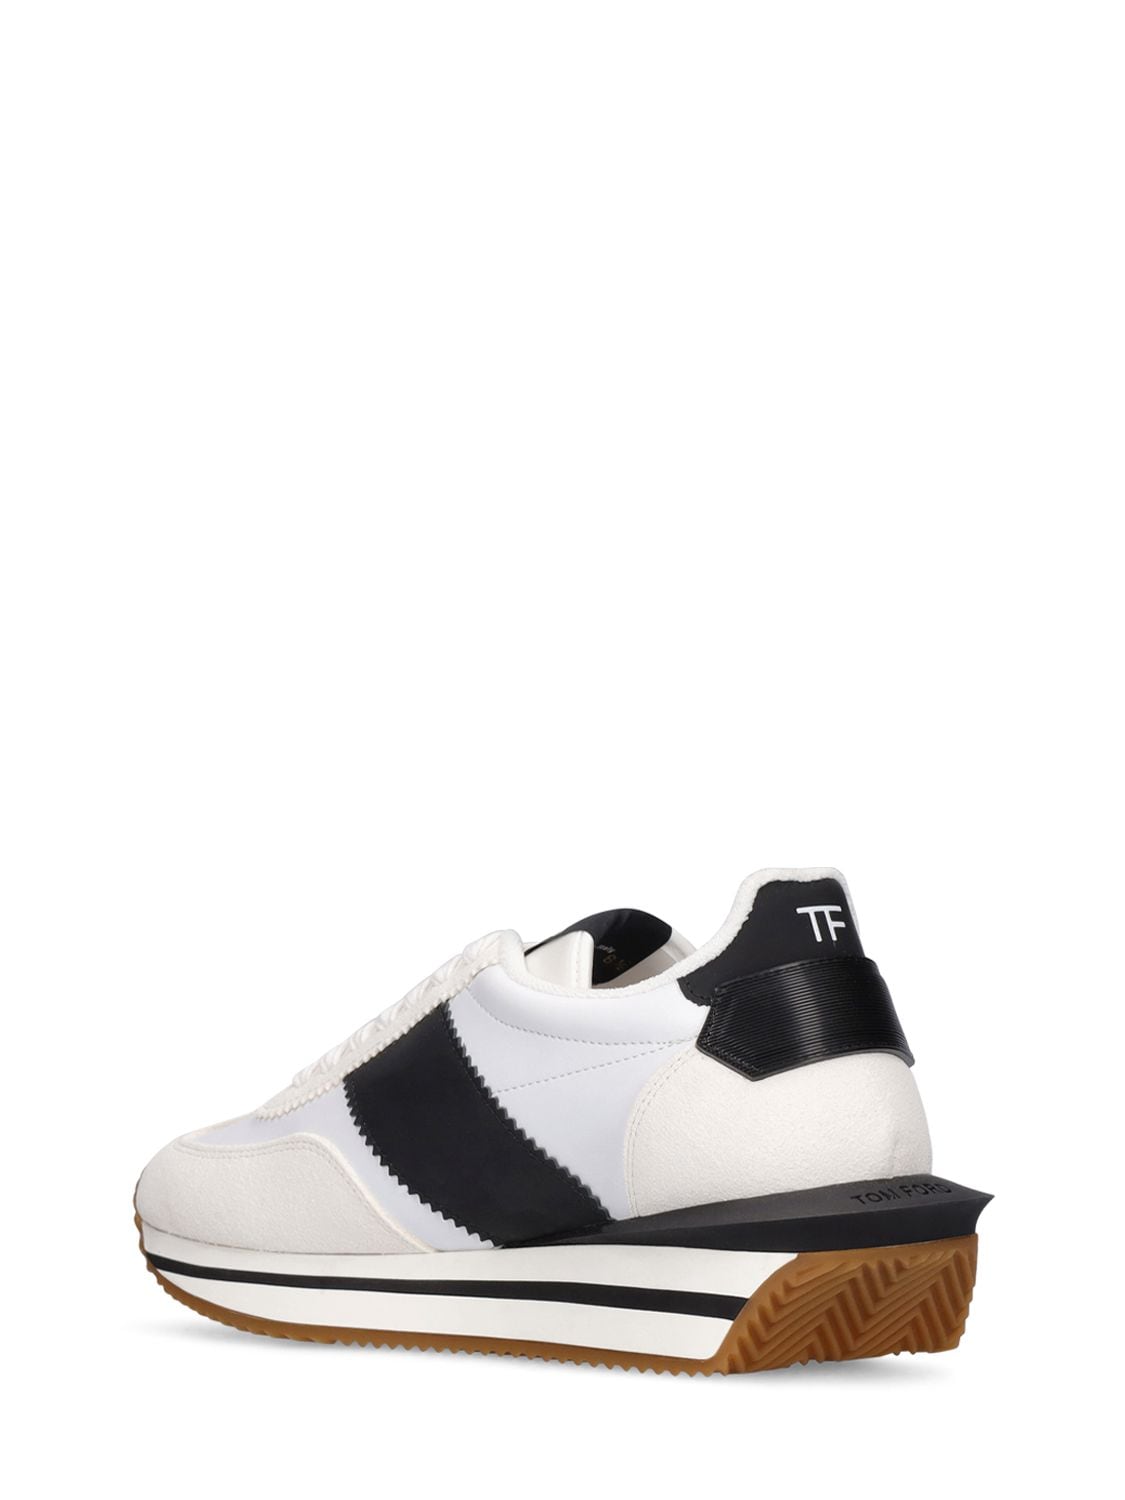 Tom Ford Suede & Tech Low Top Trainers In Black&white | ModeSens